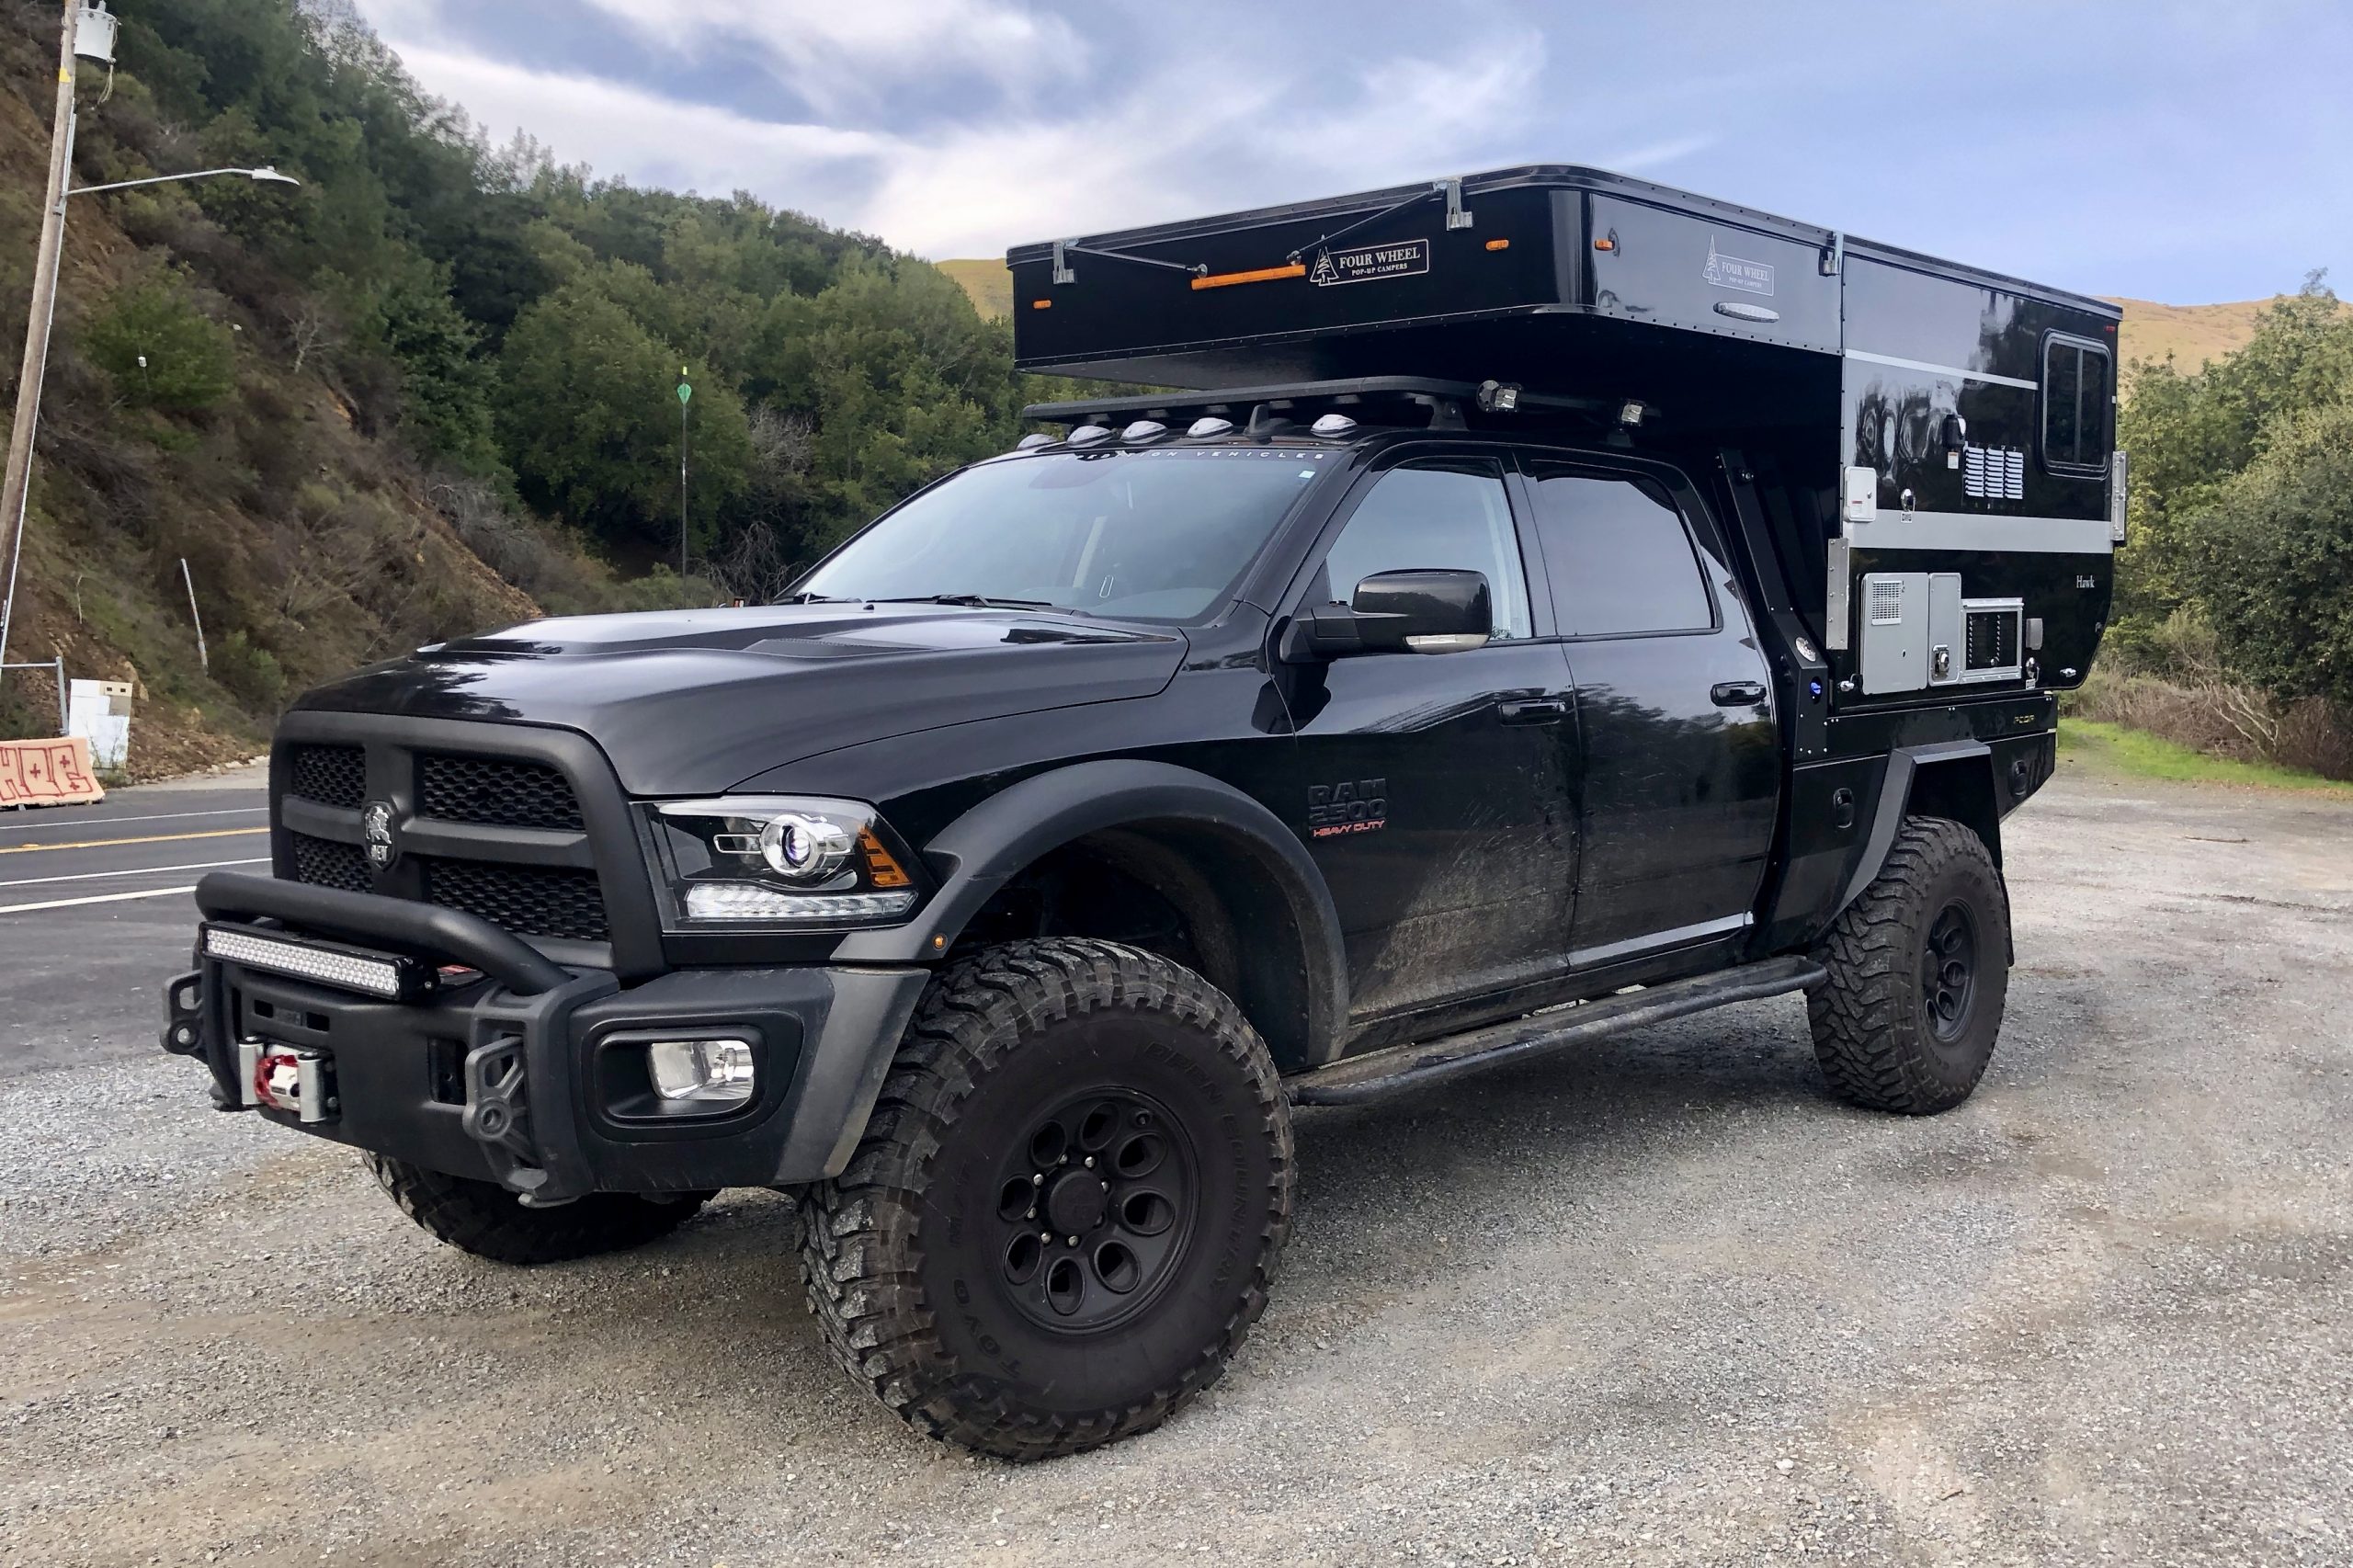 Sean Silvera's Black Dodge Ram Truck with a truck camper folded down in the truck bed